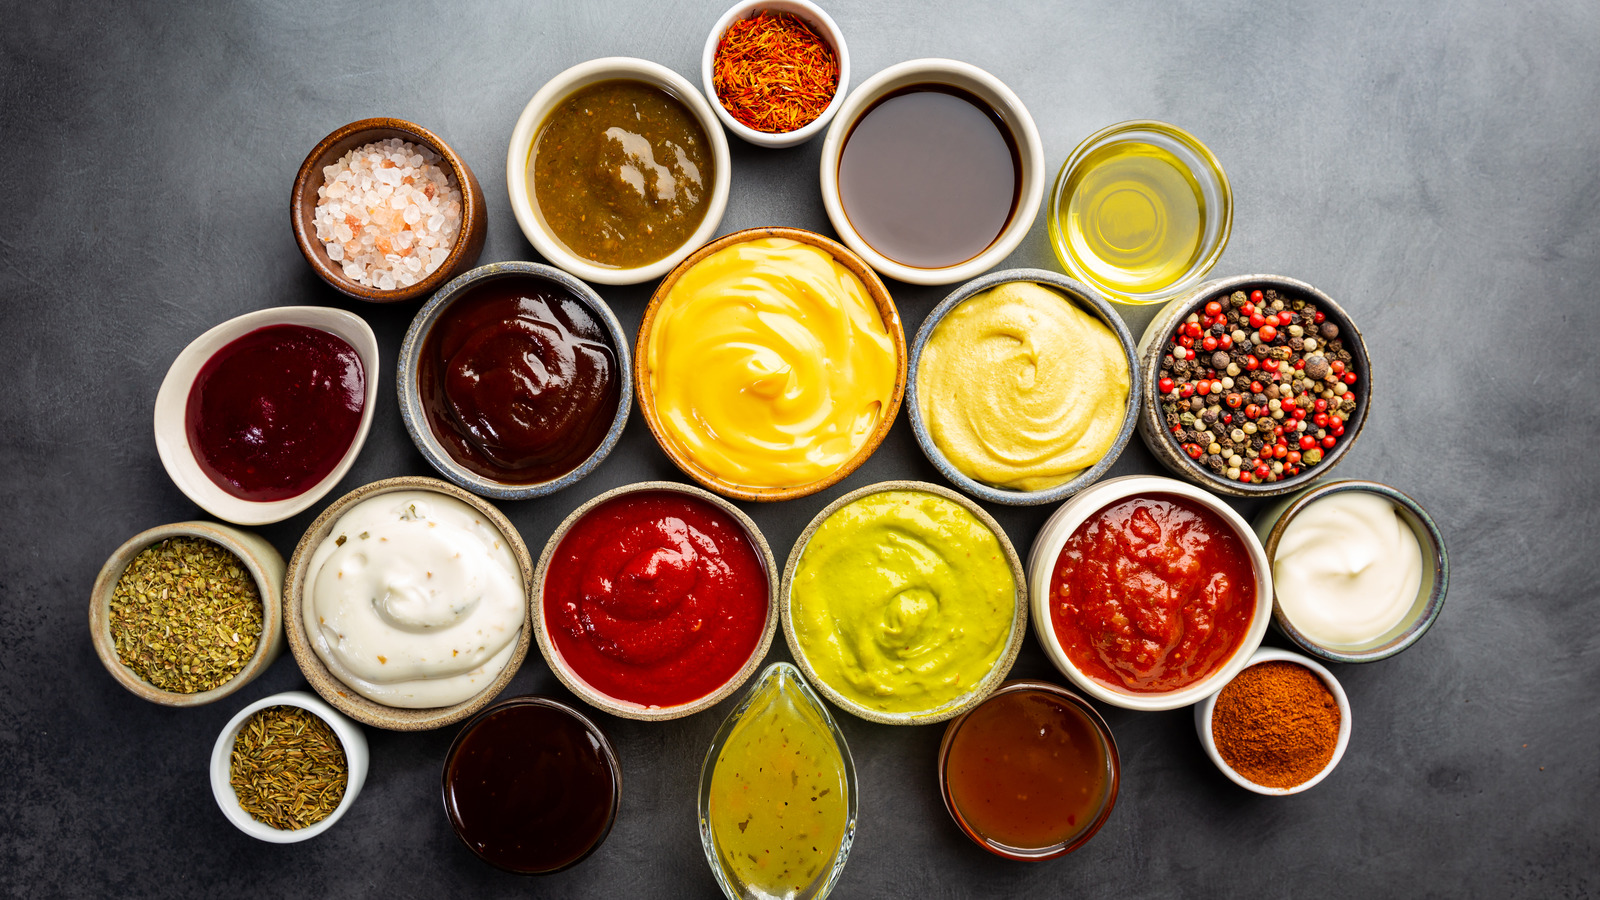 Condiments and Spices - Salad Dressings